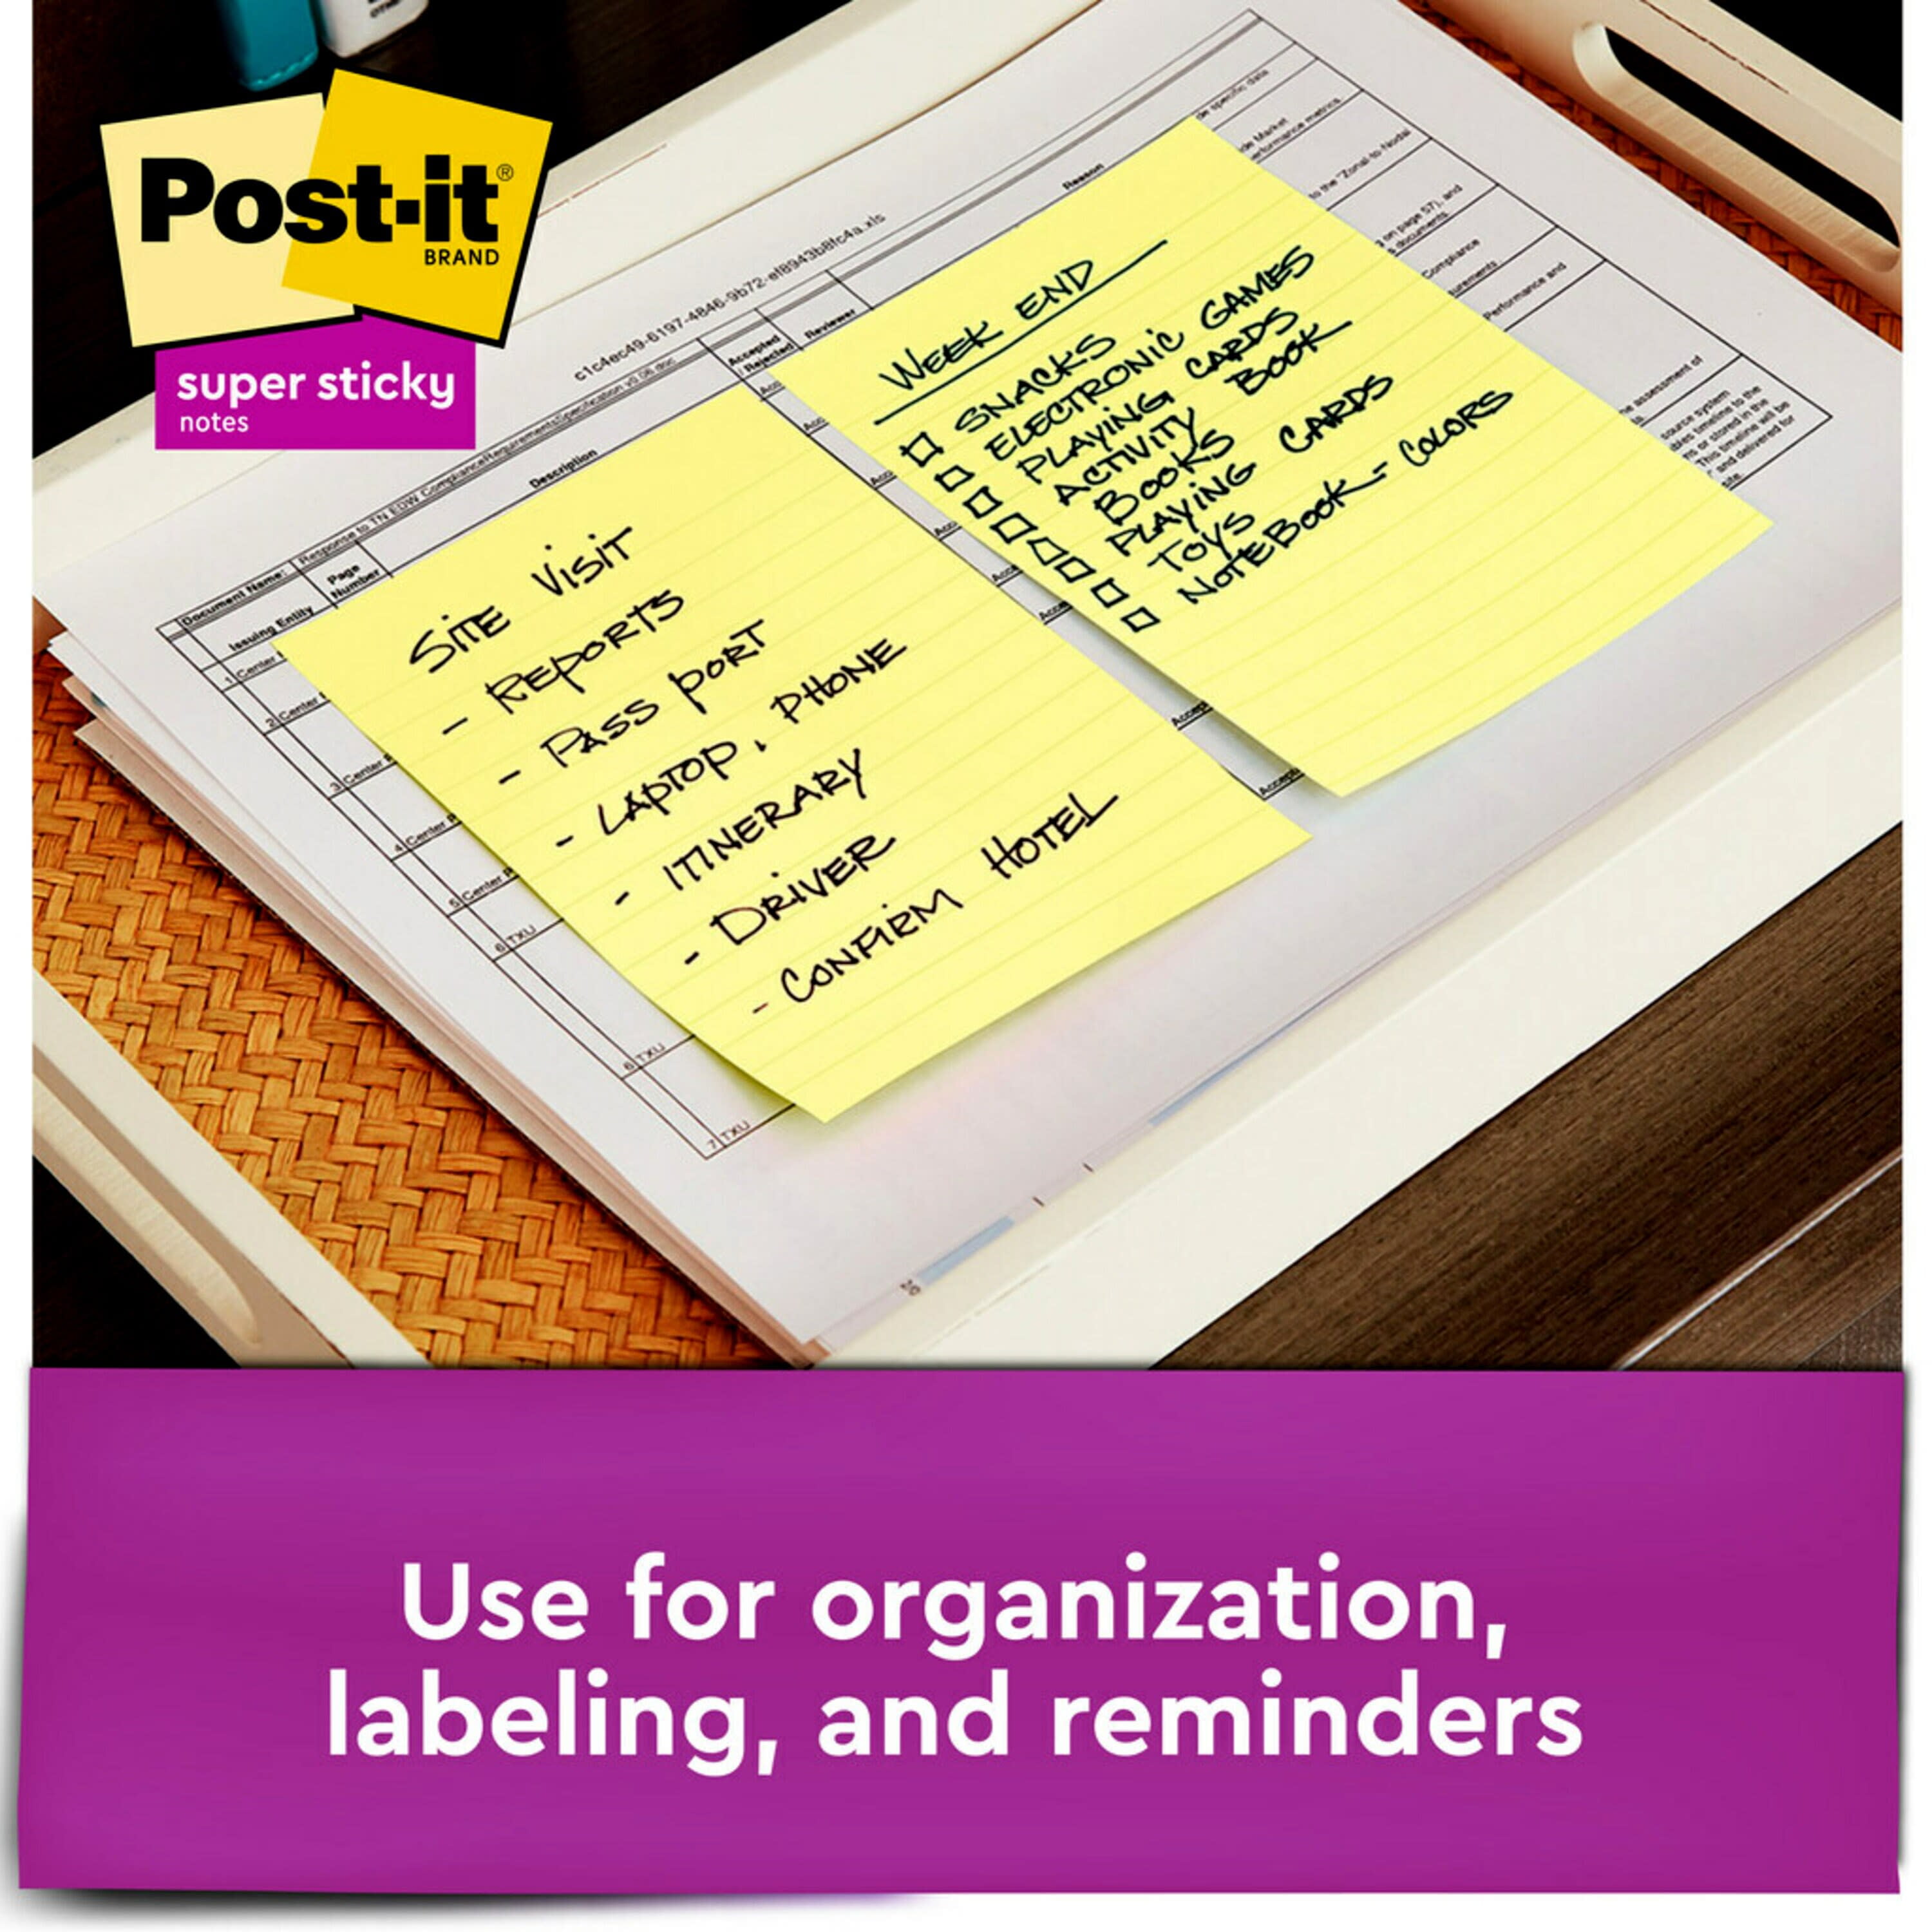 Post-it Super Sticky Lined Dispenser Notes, 4 x 4, Canary Yellow, Pack of  5 Pads